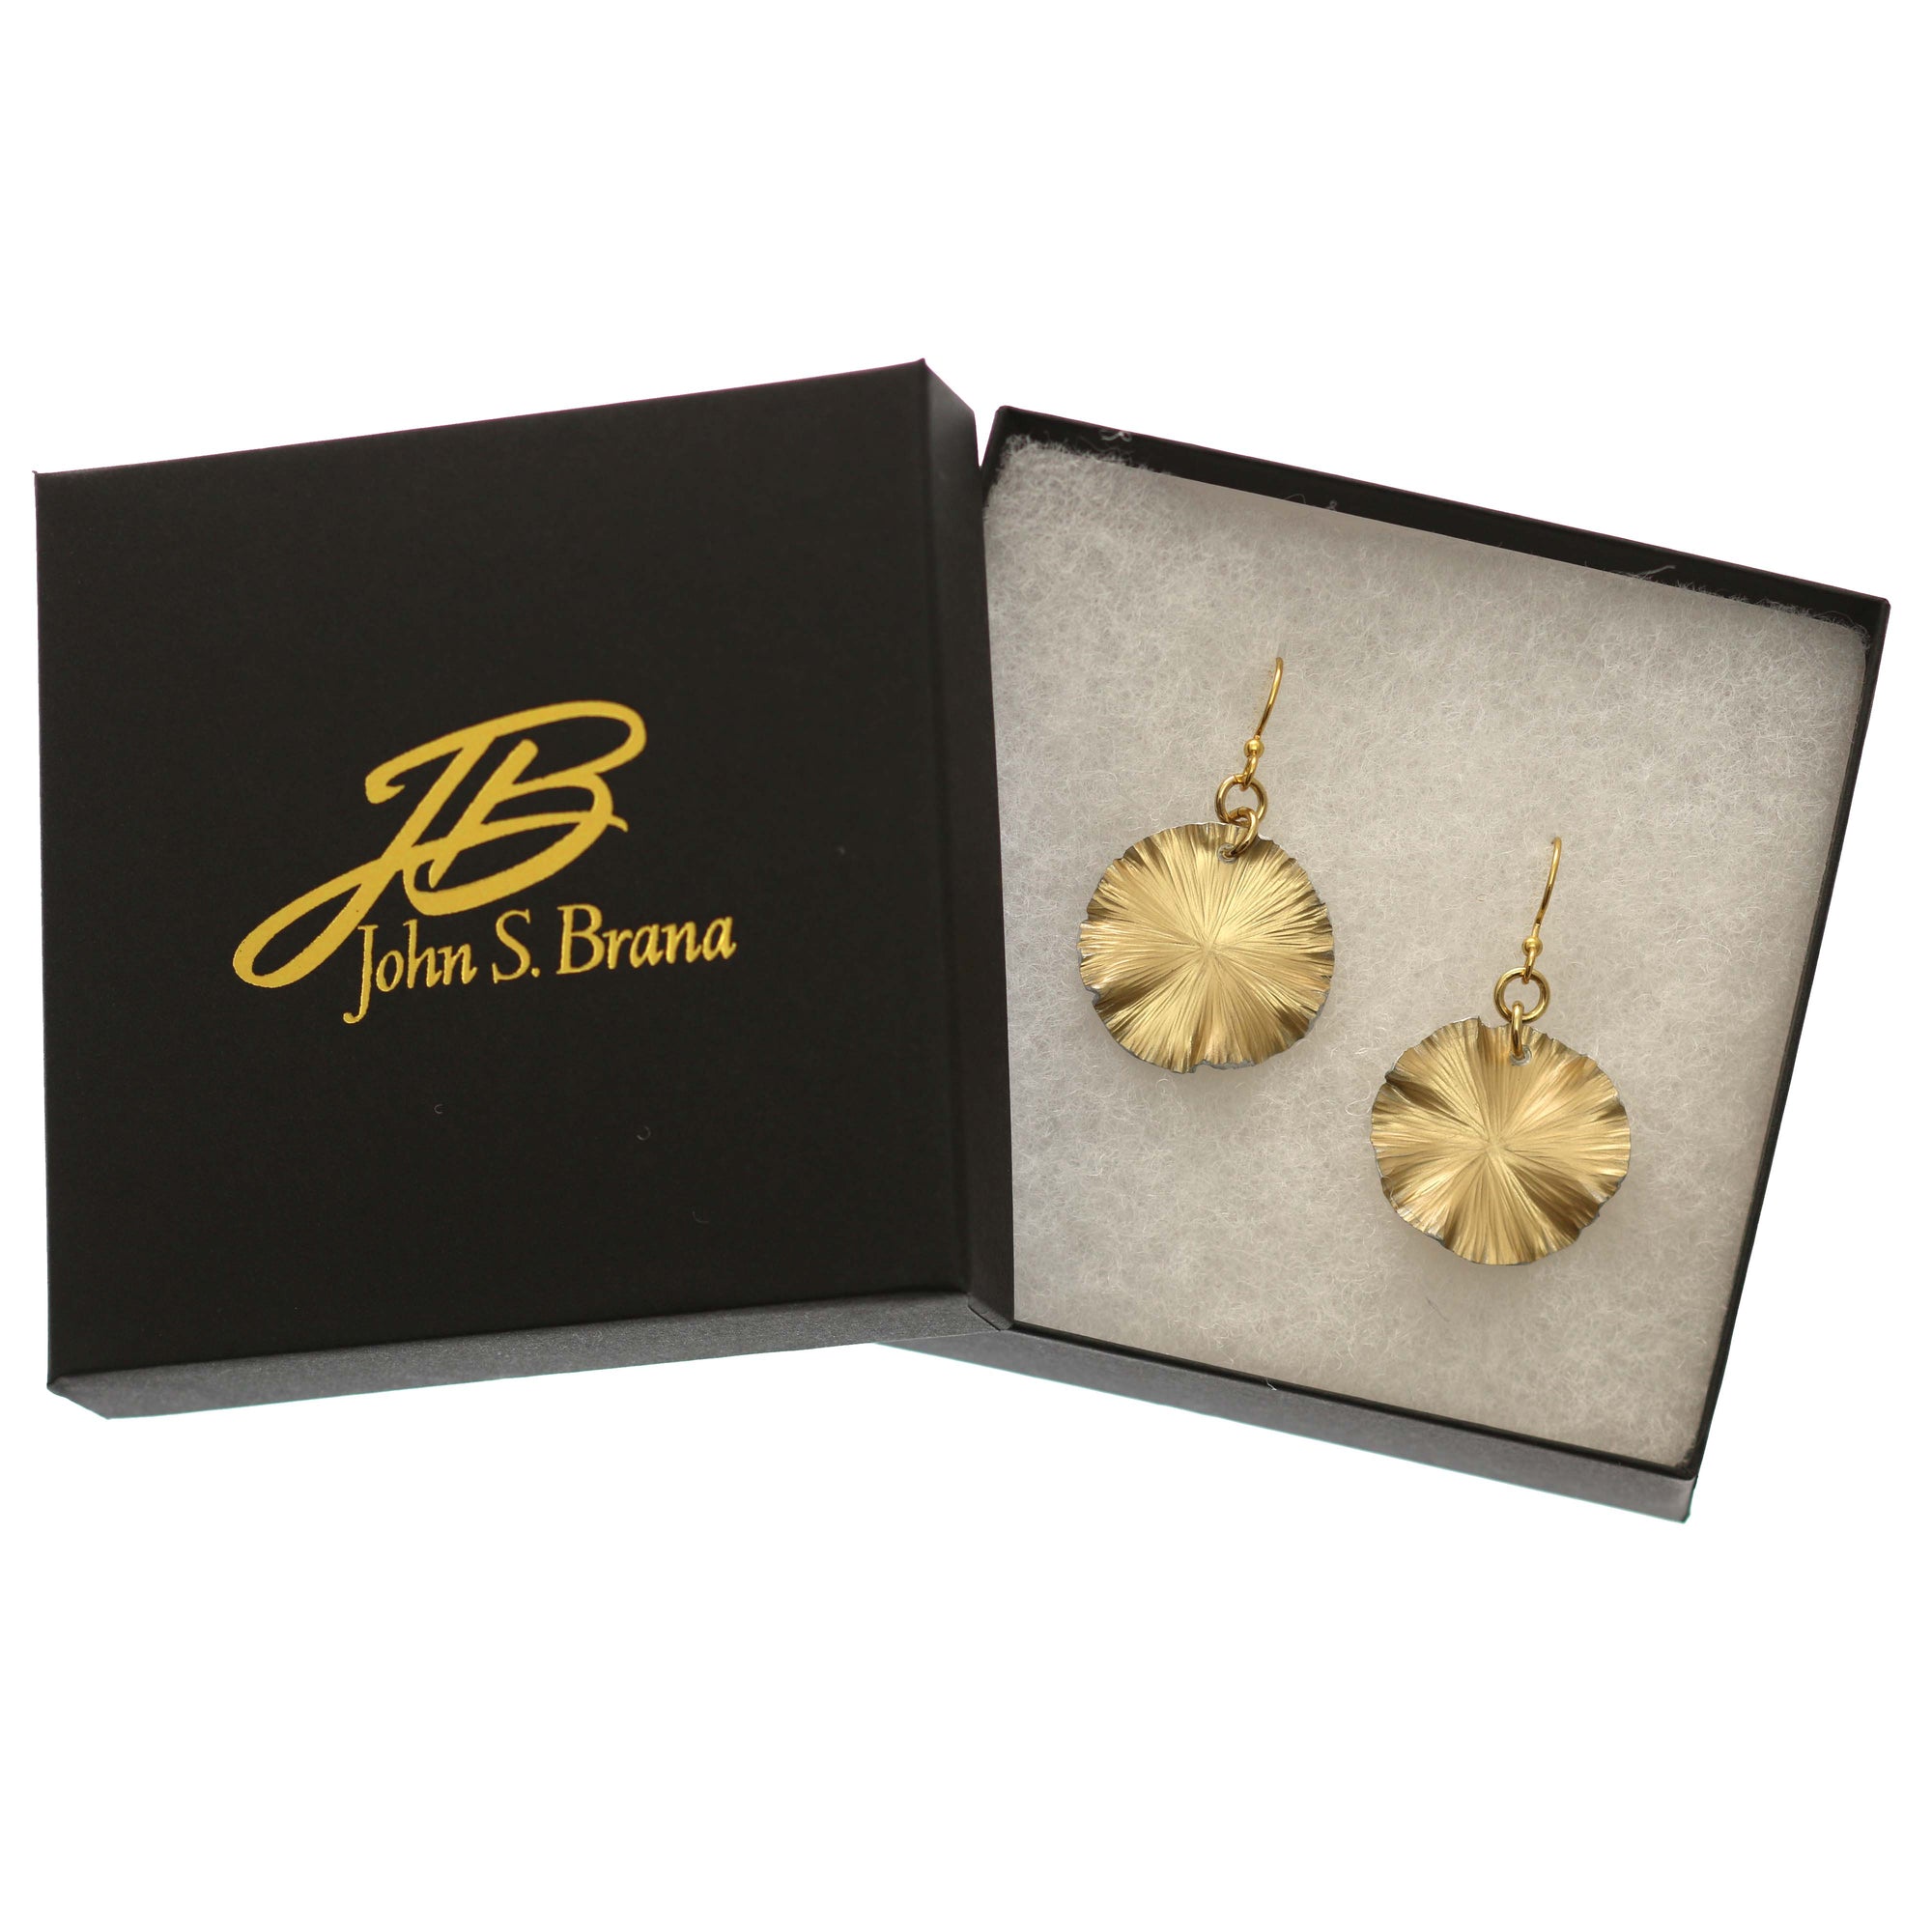 Small Gold Anodized Lily Pad Leaf Drop Earrings Displayed in a Black Gift Box